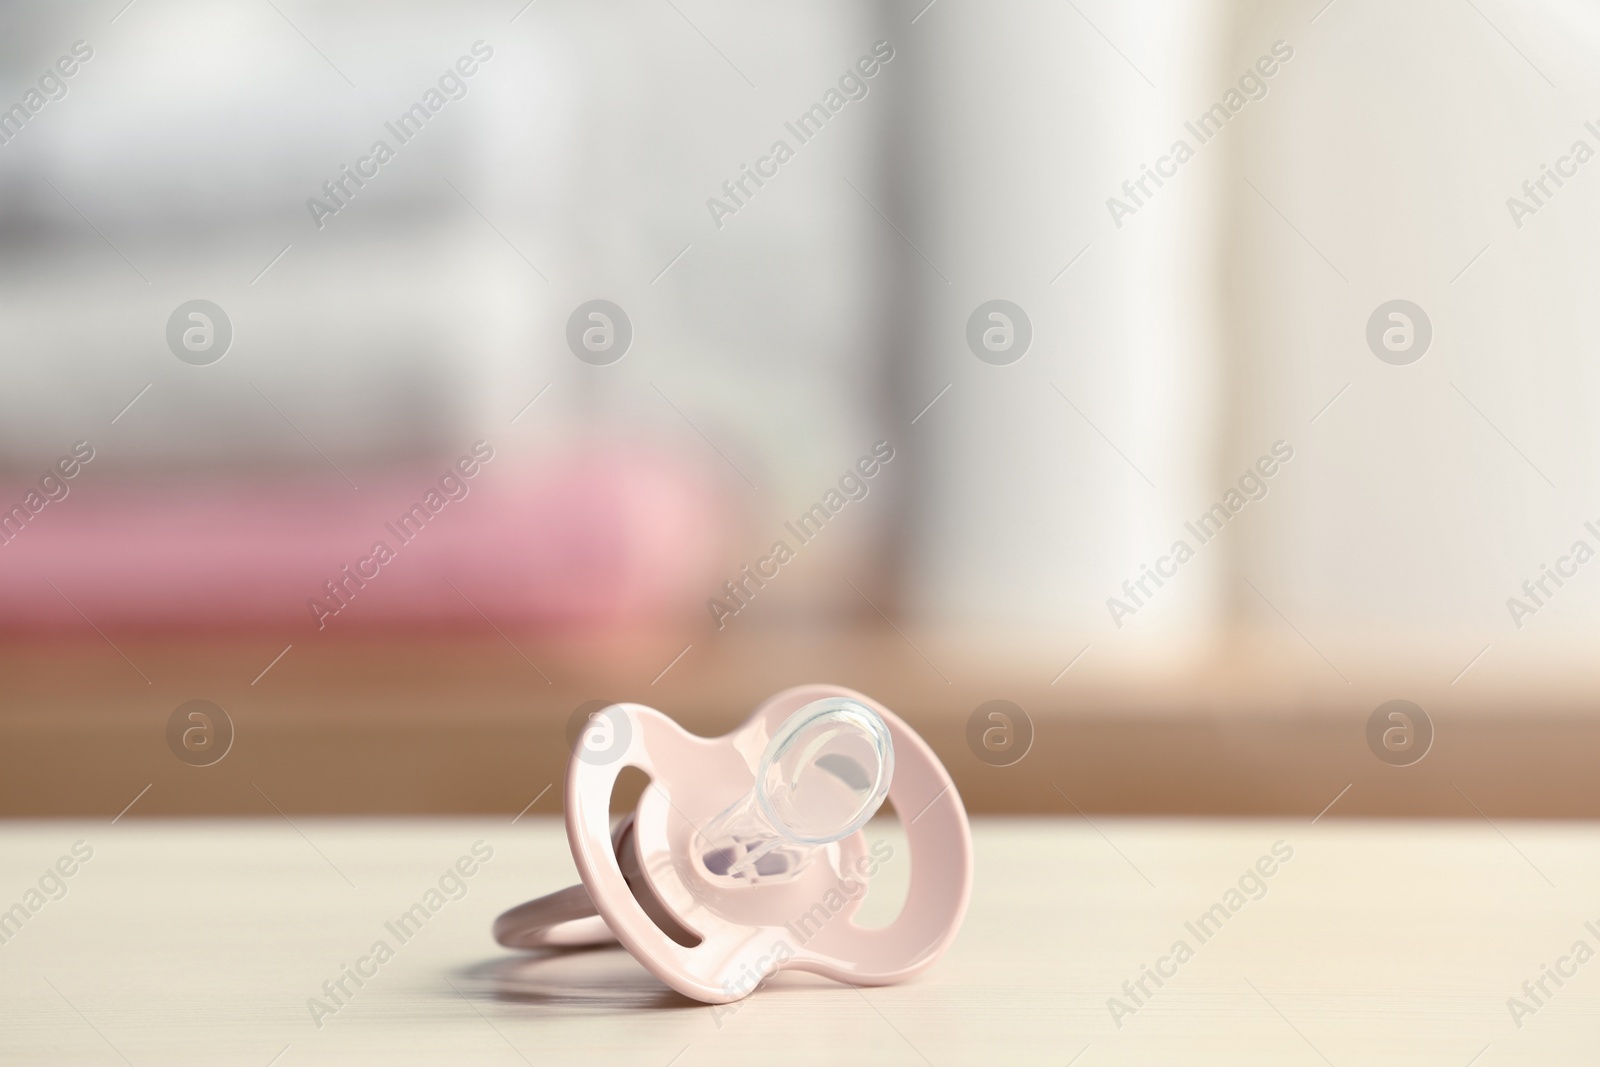 Photo of Baby pacifier on beige table against blurred background, space for text